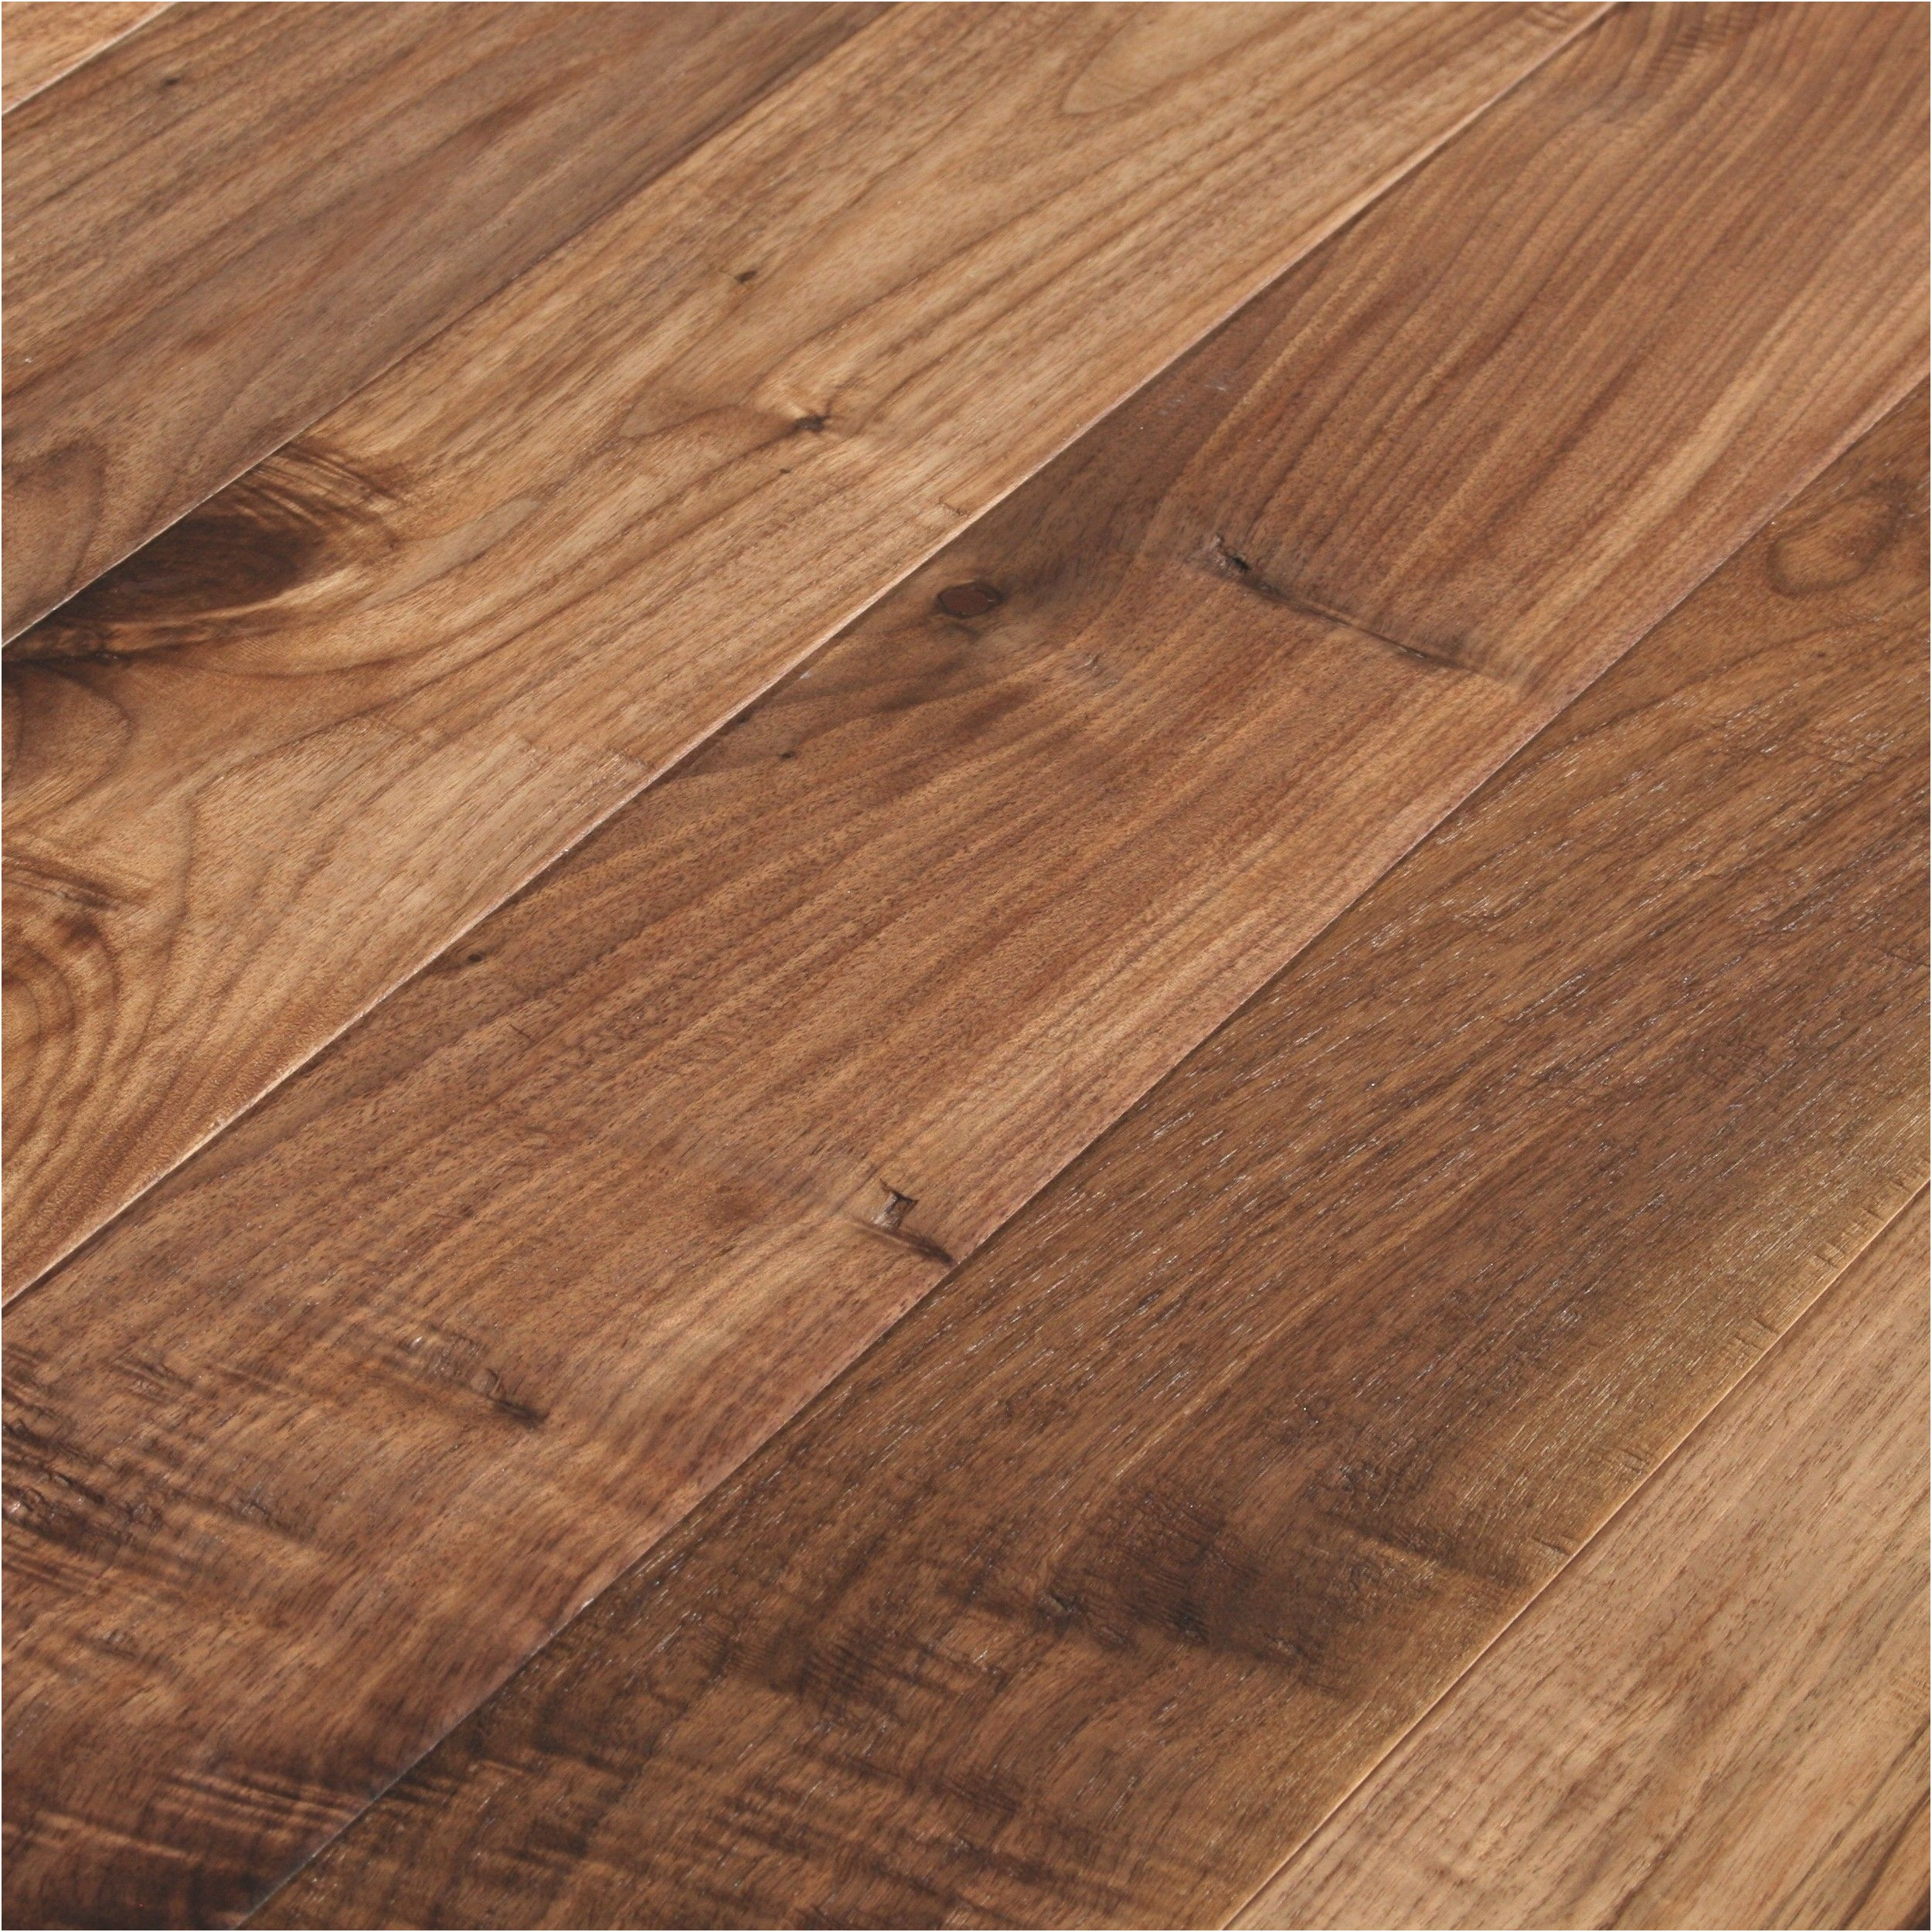 16 Unique Prefinished Hardwood Flooring Price Per Square Foot Installed 2024 free download prefinished hardwood flooring price per square foot installed of how to install prefinished hardwood flooring on concrete new regarding how to install prefinished hardwood flooring on concre